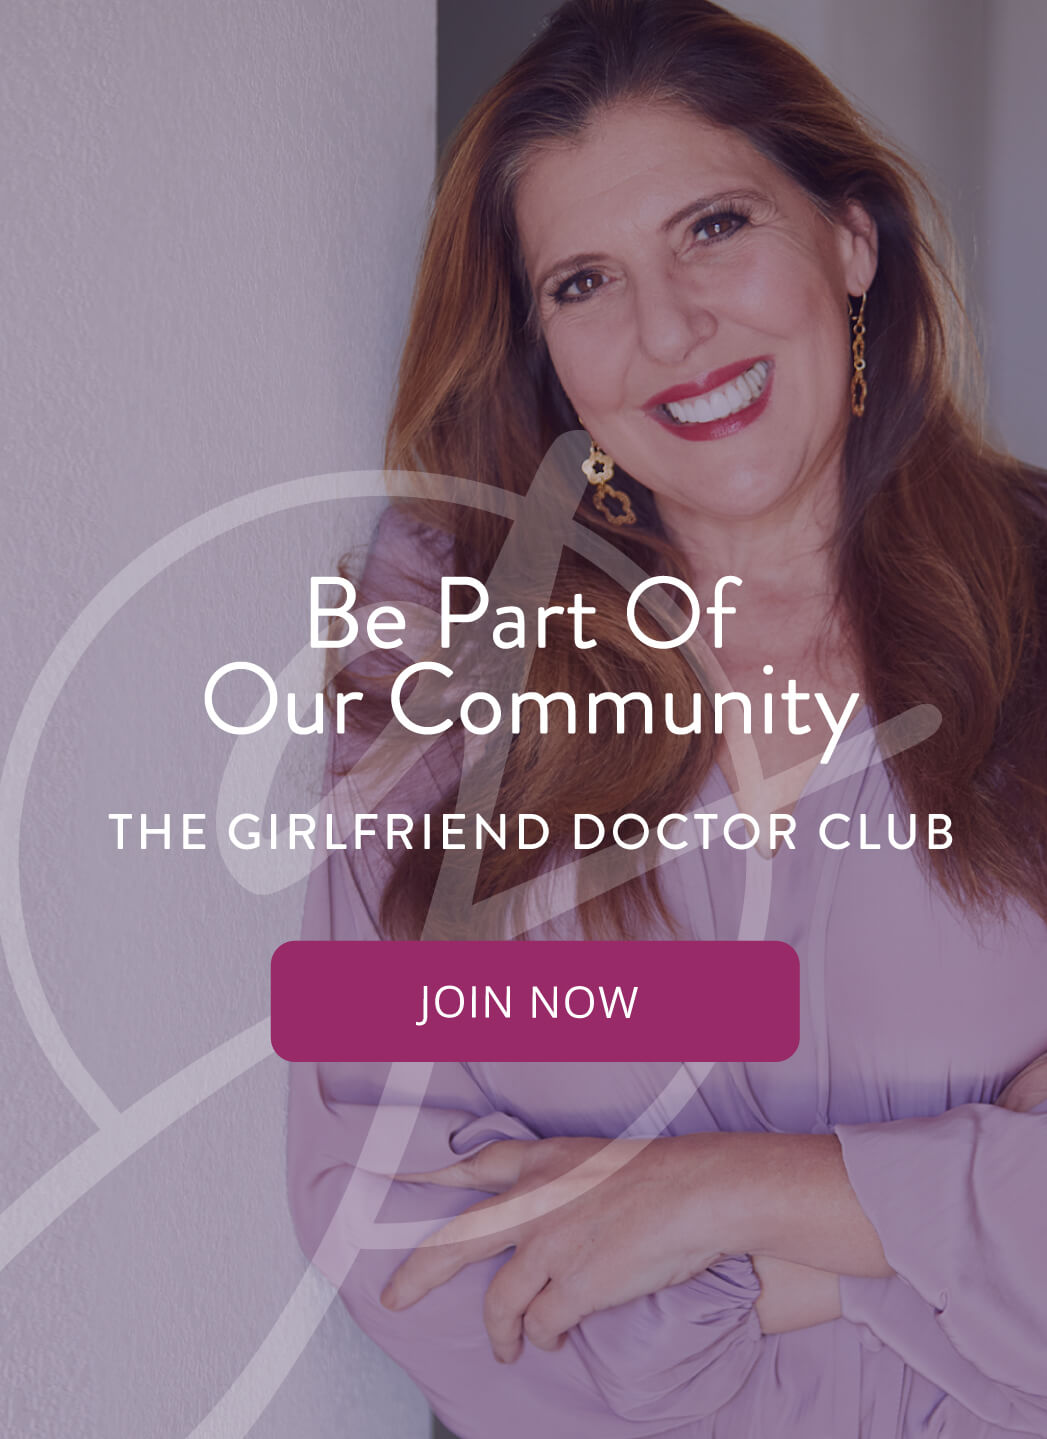 Be part of our community, The Girlfriend Doctor Club. Join Now